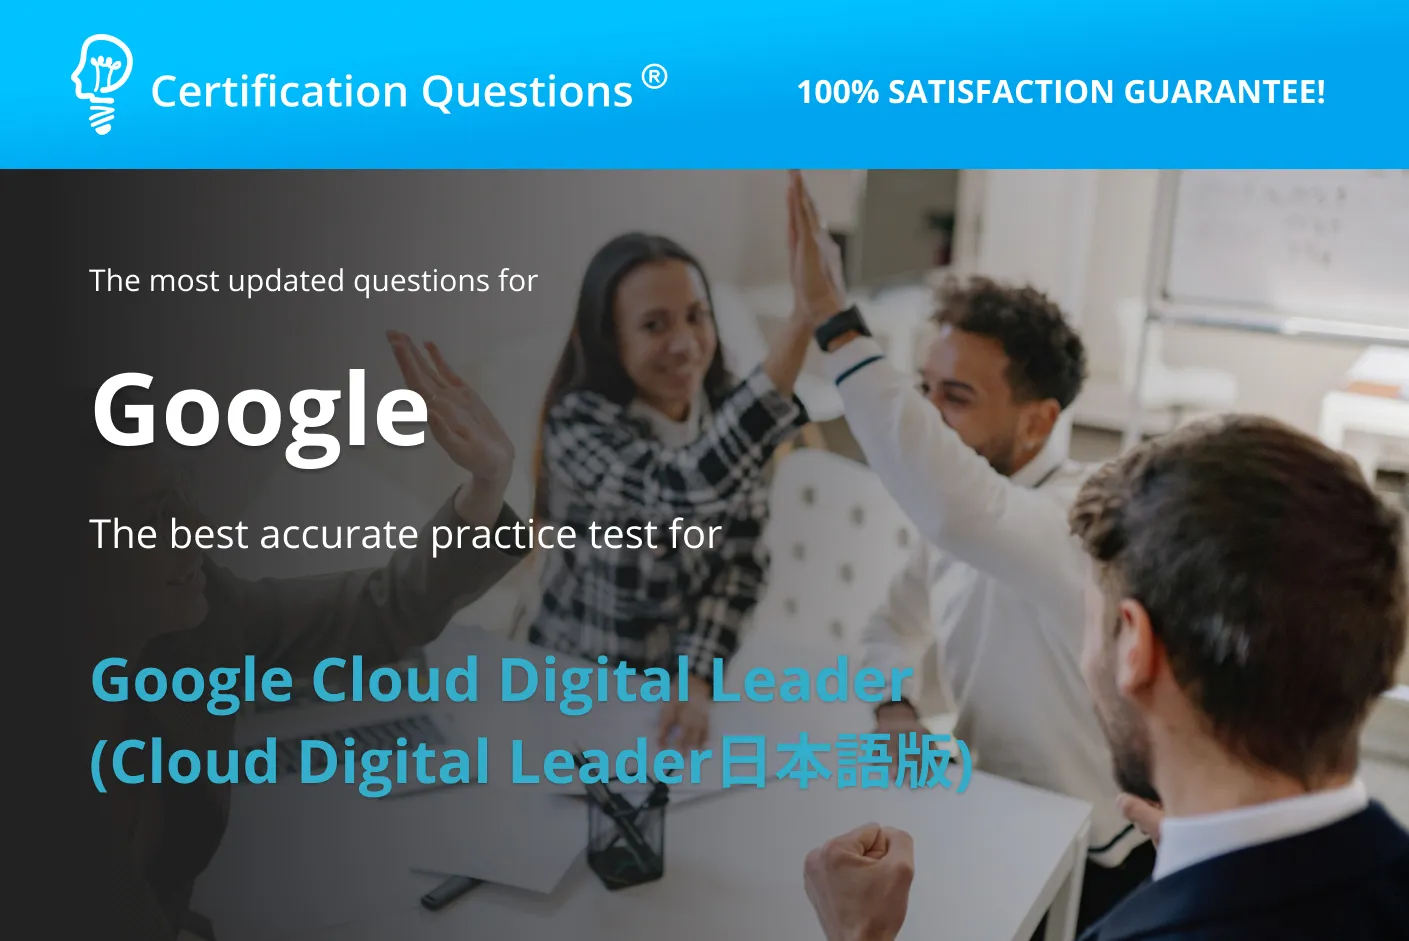 This image is related to cloud digital leader exam questions